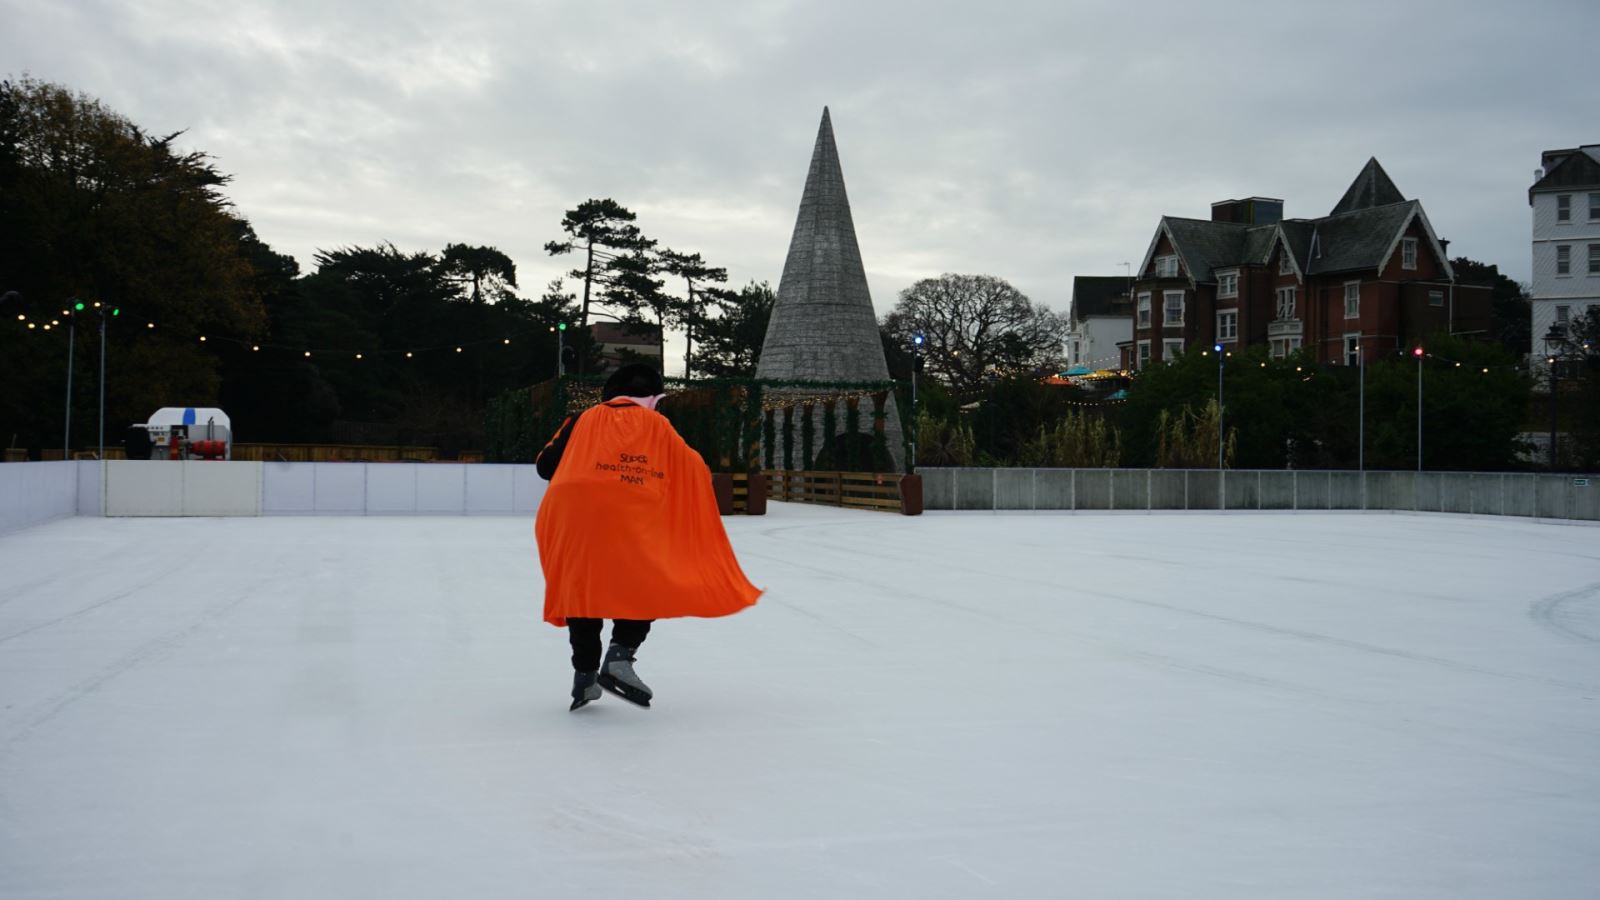 Mr Health on Line in Bournemouth, ice-skating away as his orange cape is blown by the wind